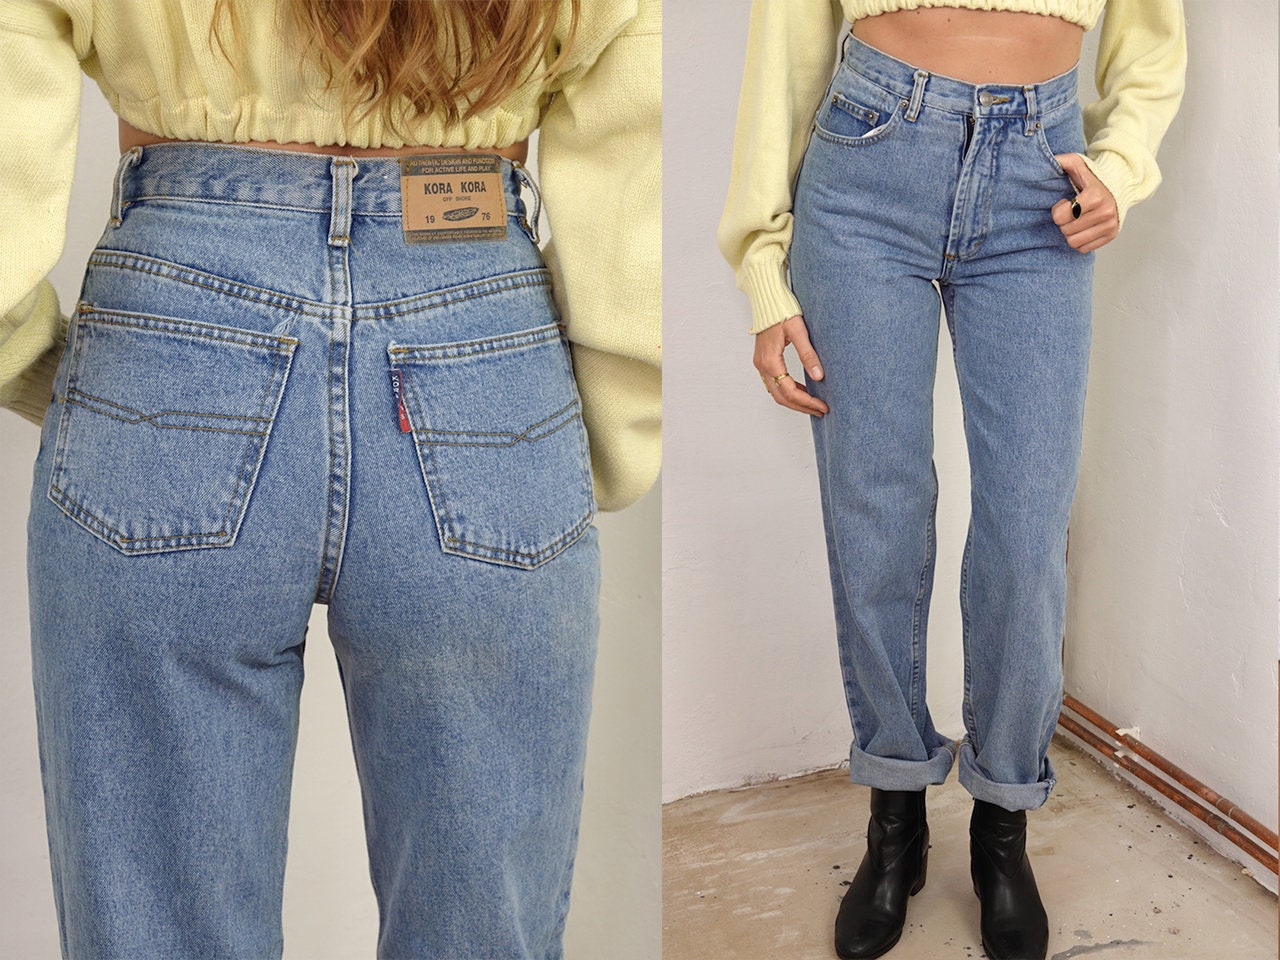 vintage 80's levi's 504 high waisted jeans